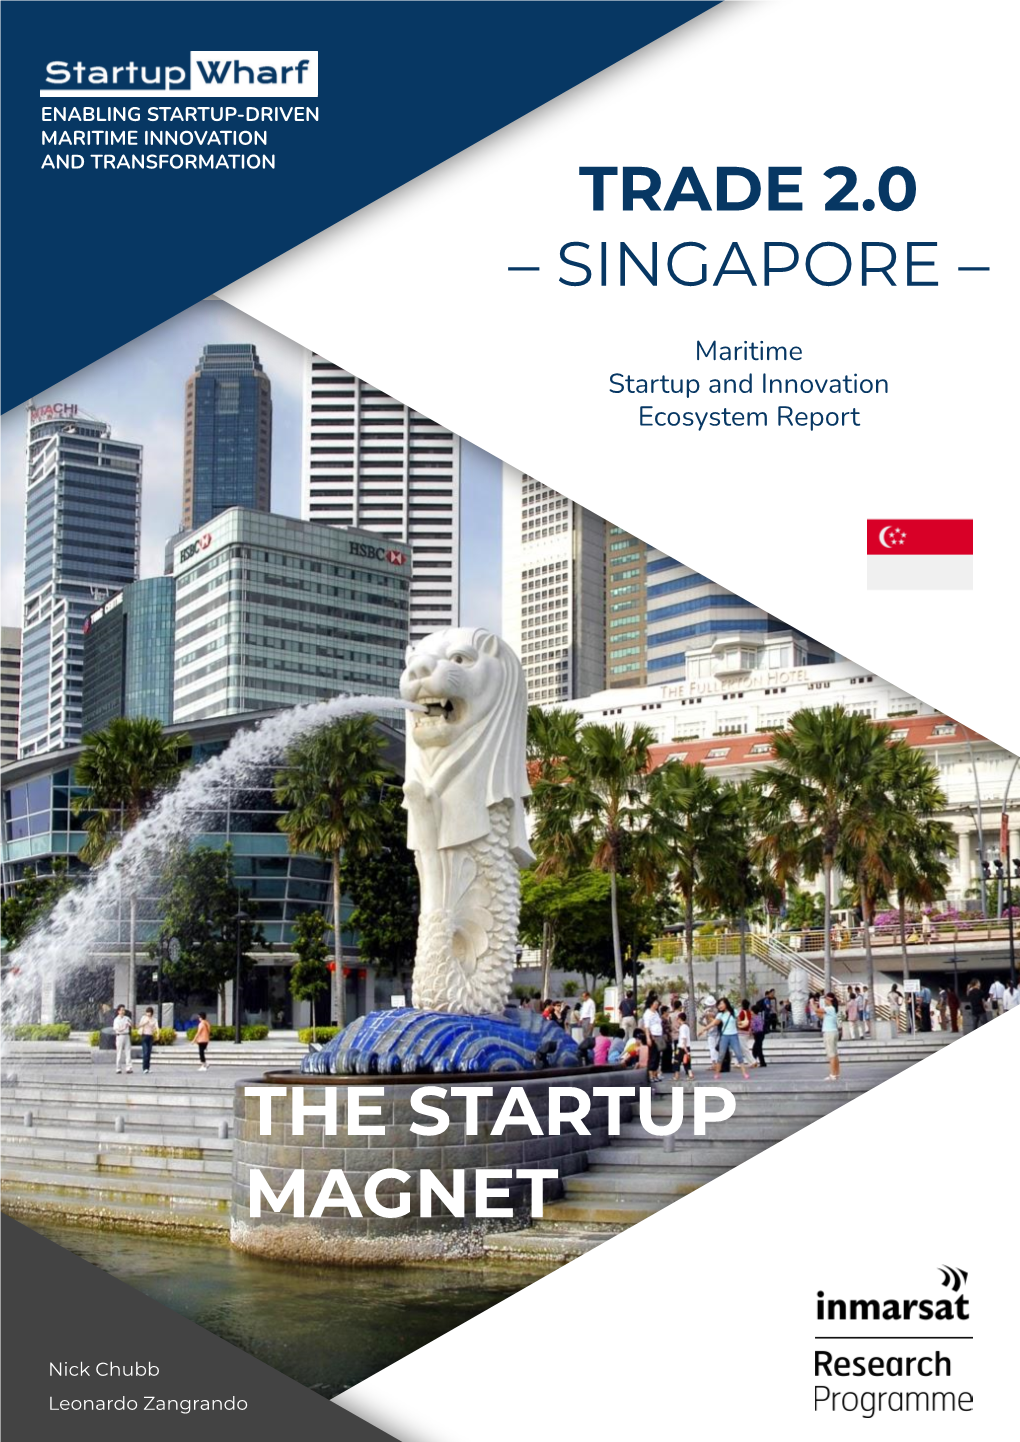 Maritime Startup and Innovation Ecosystem Report